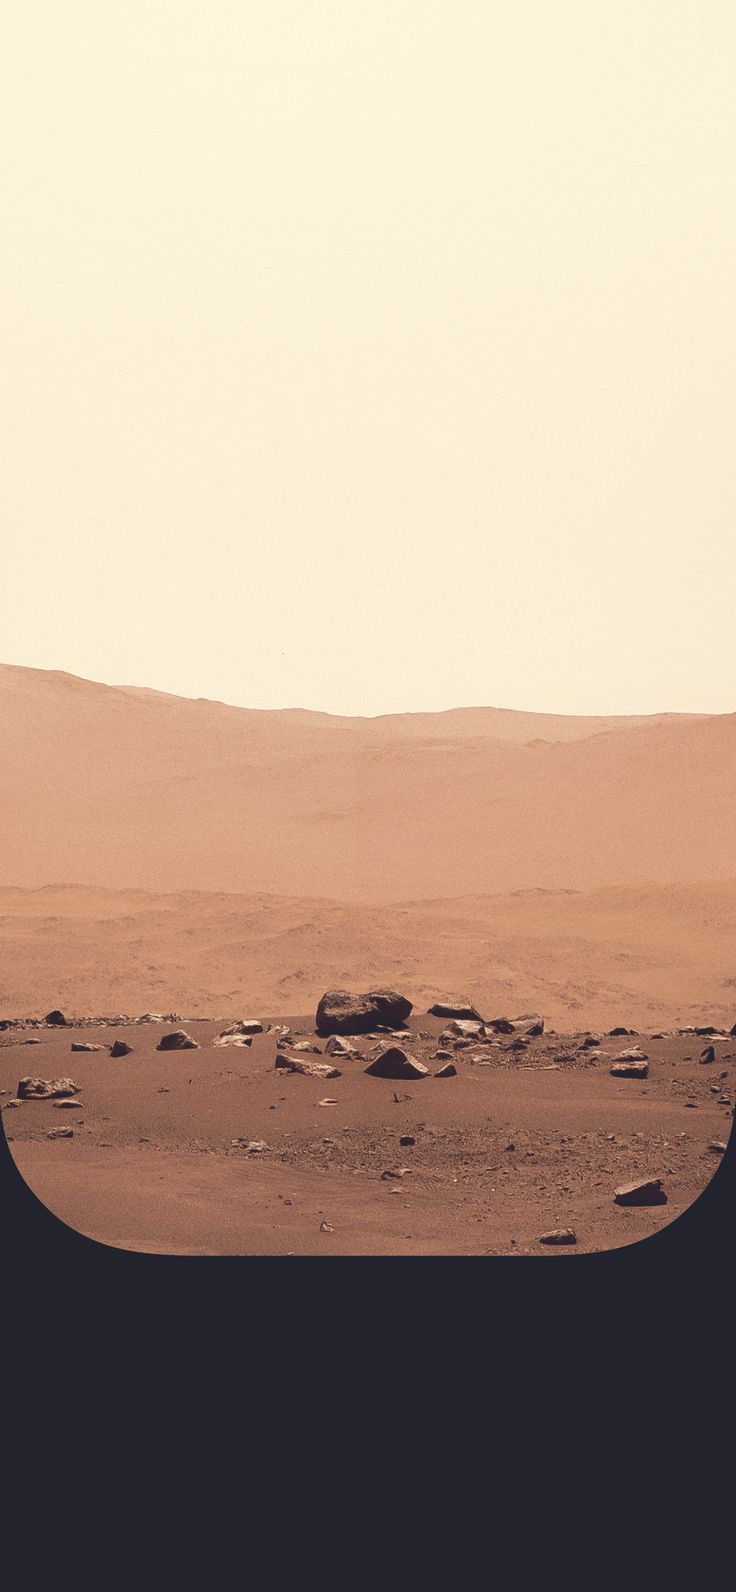 A sandy desert with a rock in the middle. - Mars